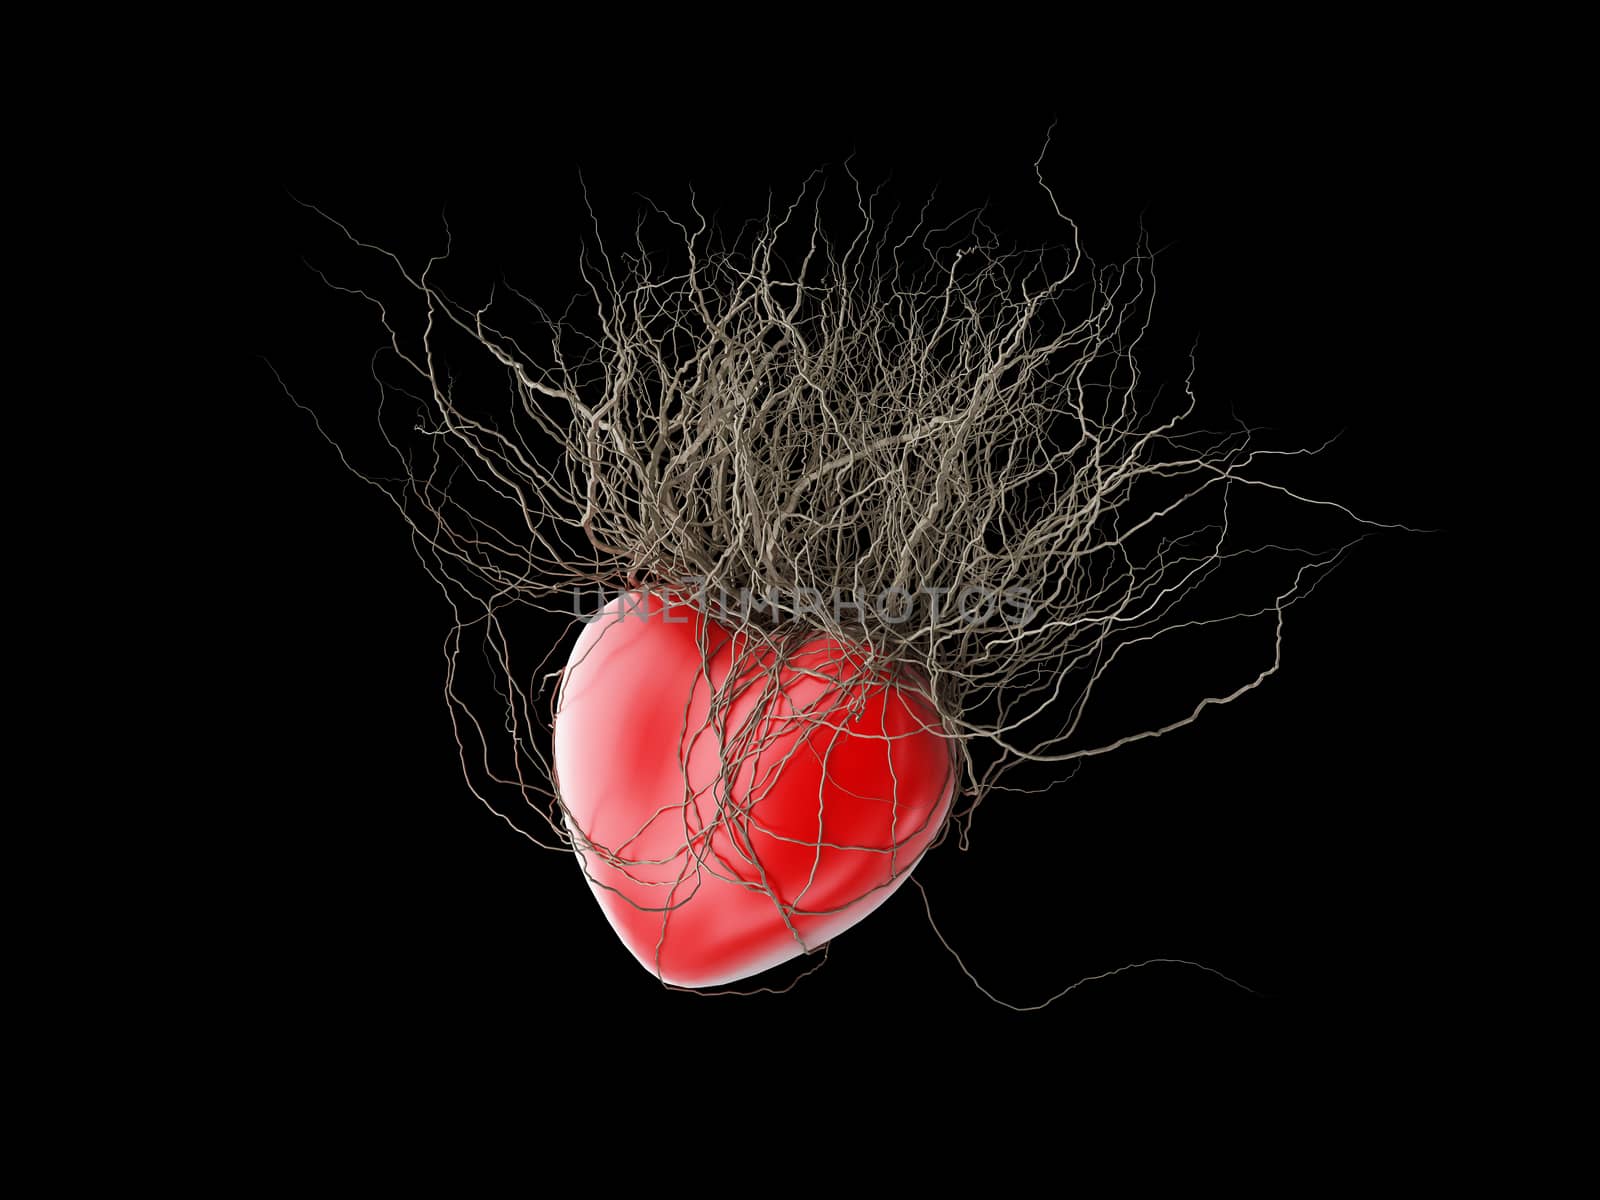 Brown's roots grew out of a red heart, in a black background. by teerawit